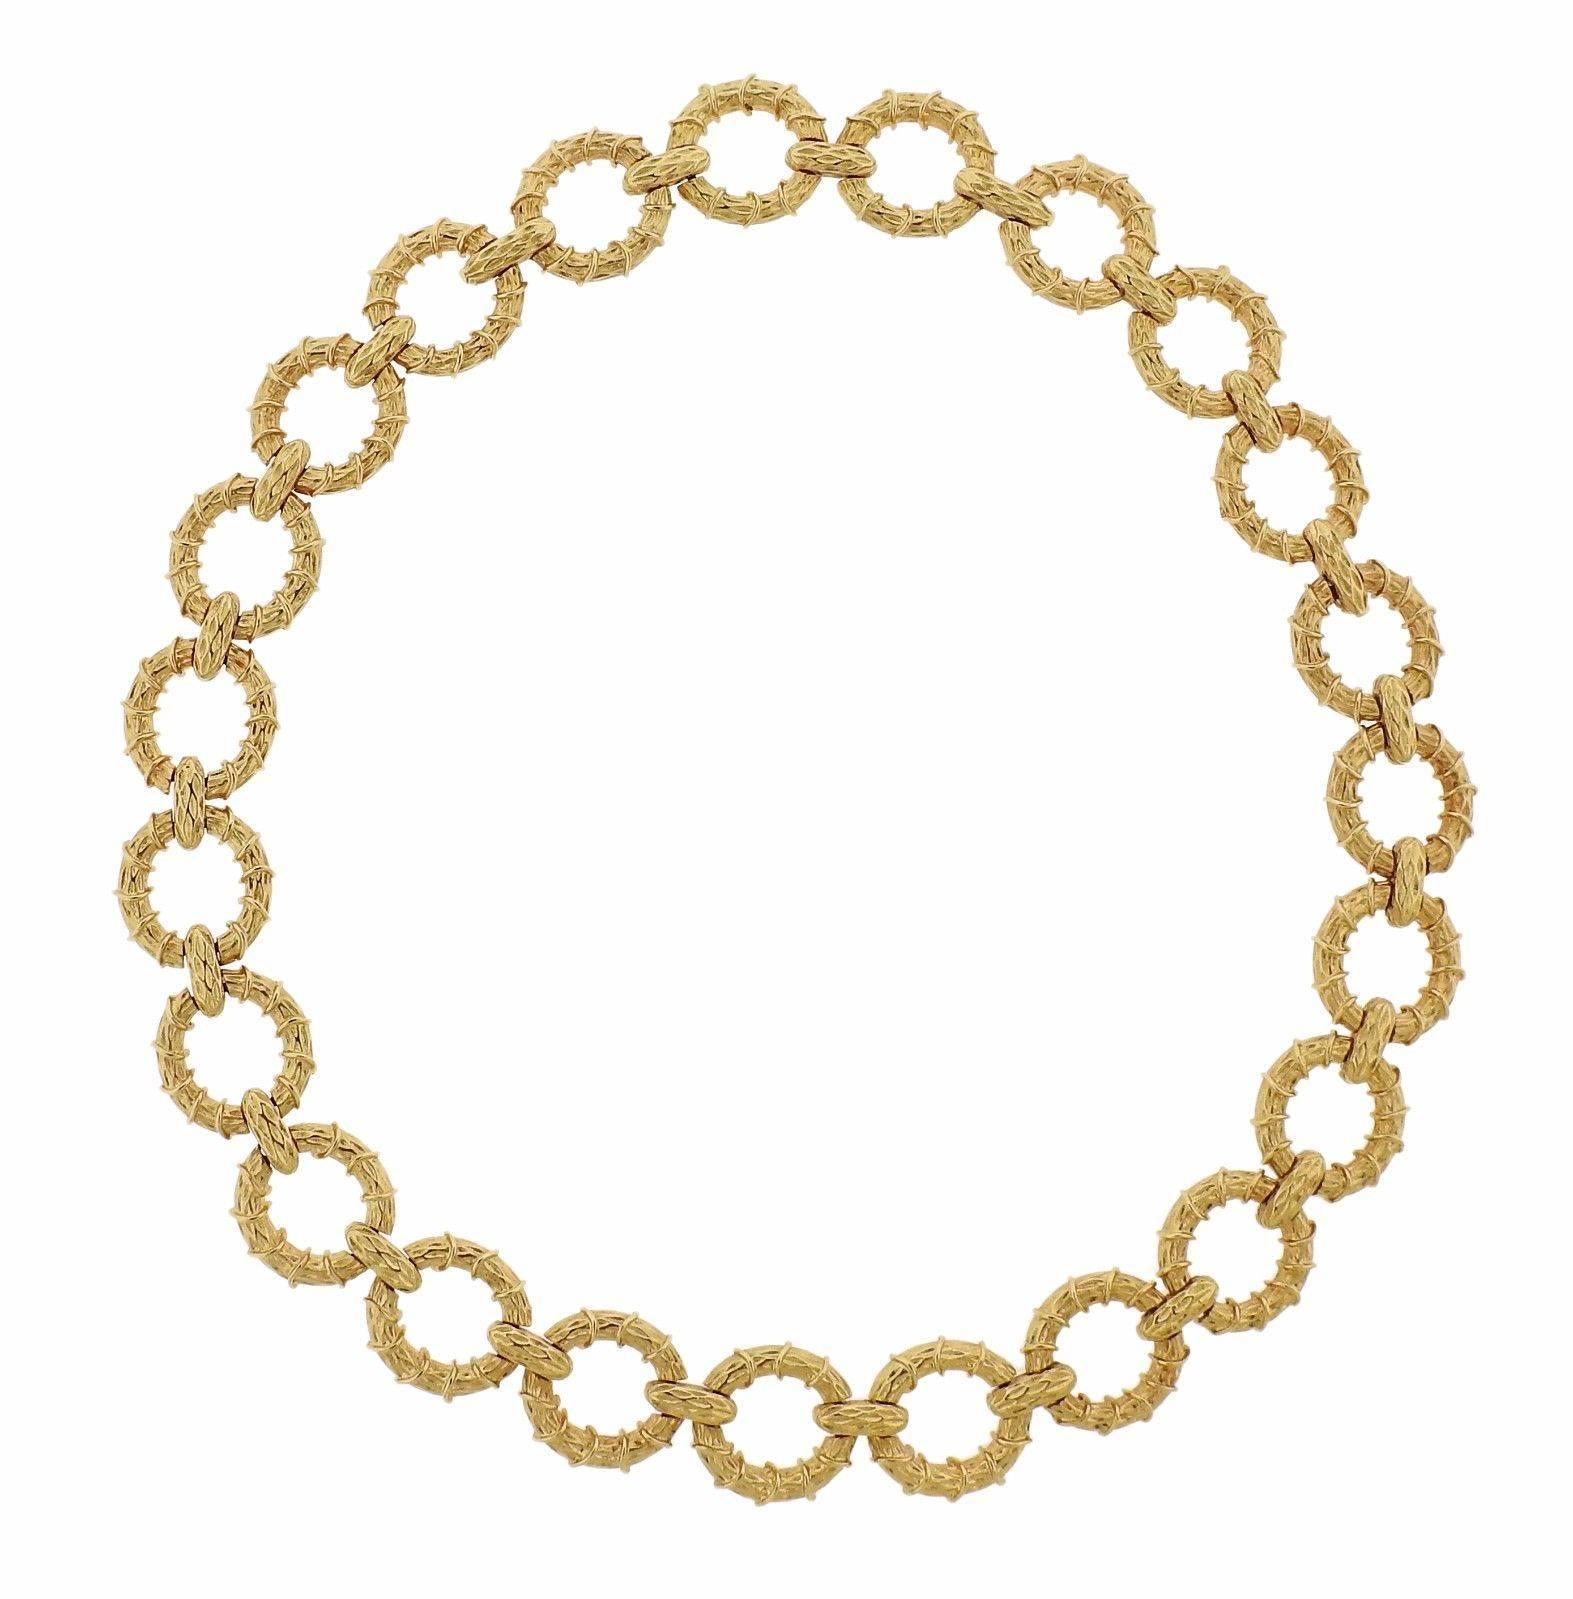 An 18k yellow gold bracelet and necklace suite.  The necklace is 21" long (with two sets of extra removable links - 3"each, on each side). Bracelet is 7 /4" long. Each piece is 20mm wide.  The weight of the set is 192 grams.